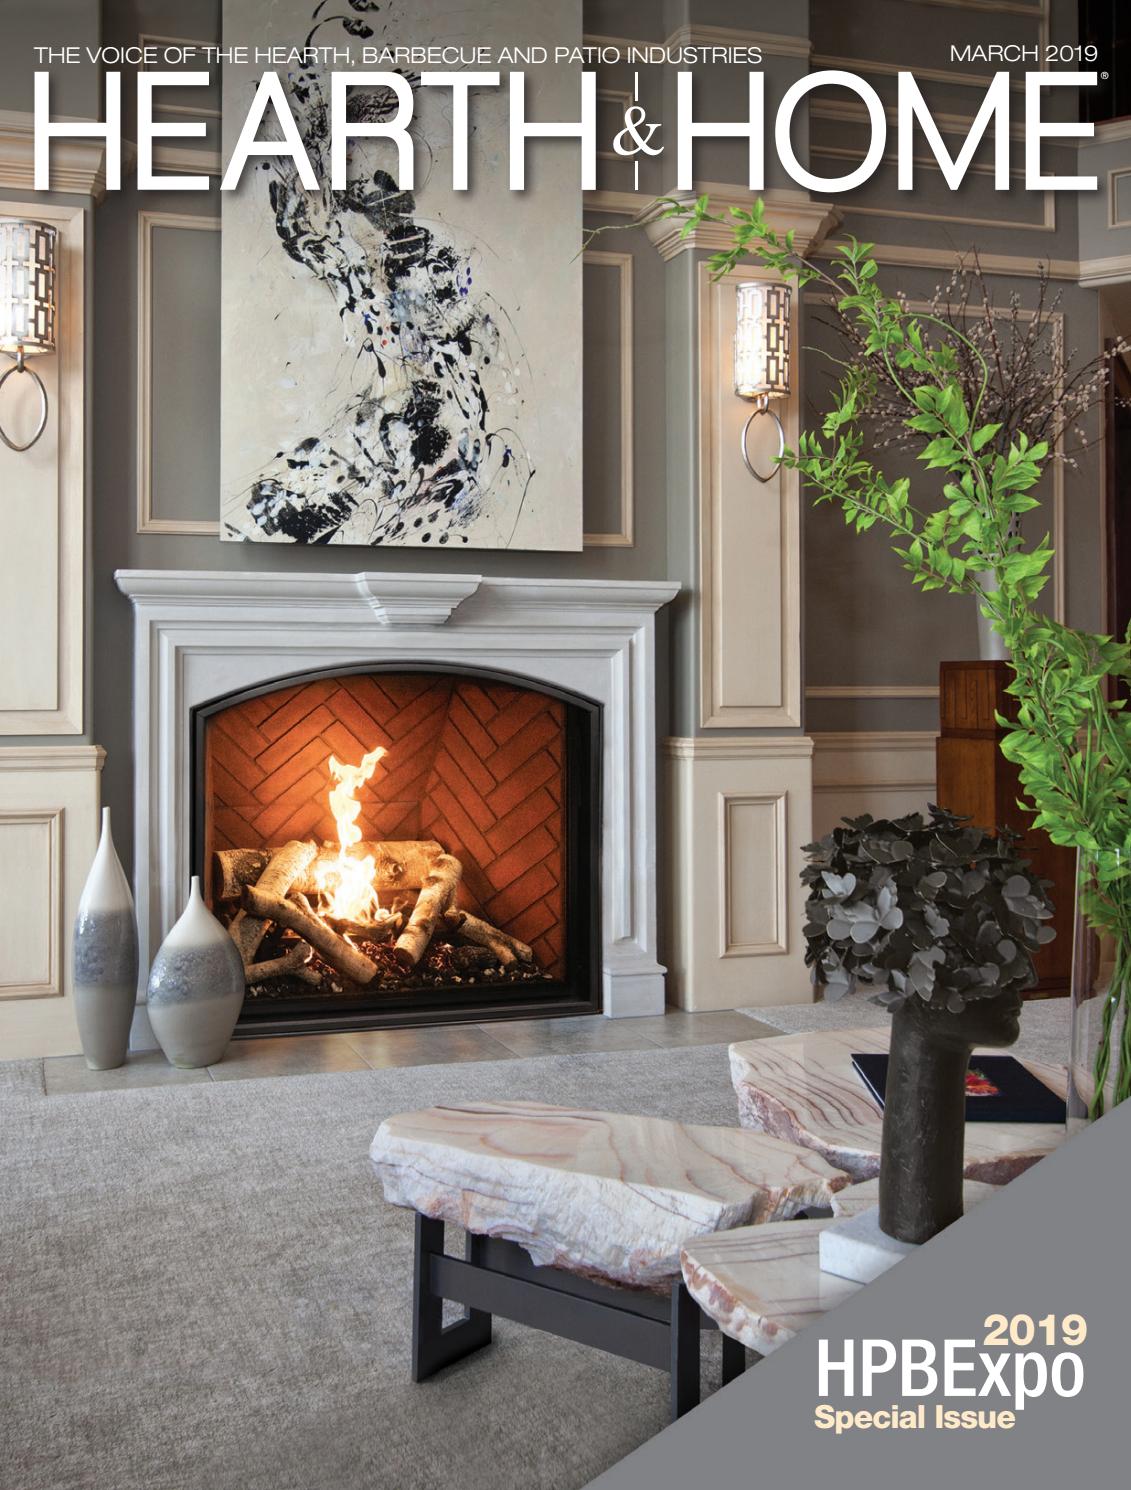 Double Sided Electric Fireplace Insert Beautiful Hearth & Home Magazine – 2019 March issue by Hearth & Home